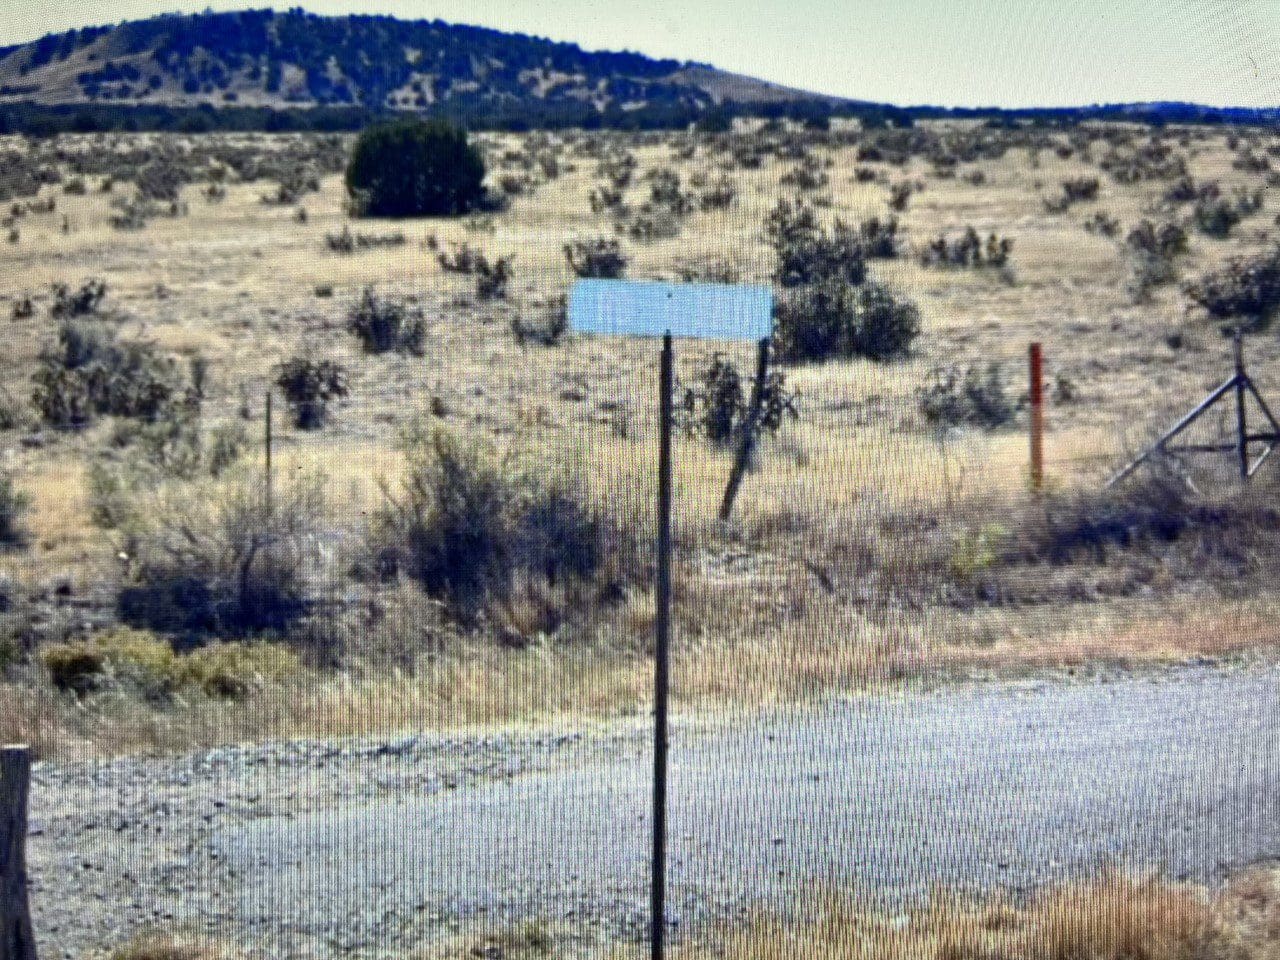 38.35 ACRES OF RAW VACANT LAND IN GORGEOUS LAS ANIMAS COUNTY, COLORADO WITH A MAJESTIC MOUNTAIN RISING UP IN THE MIDDLE TRULY INCREDIBLE! photo 24